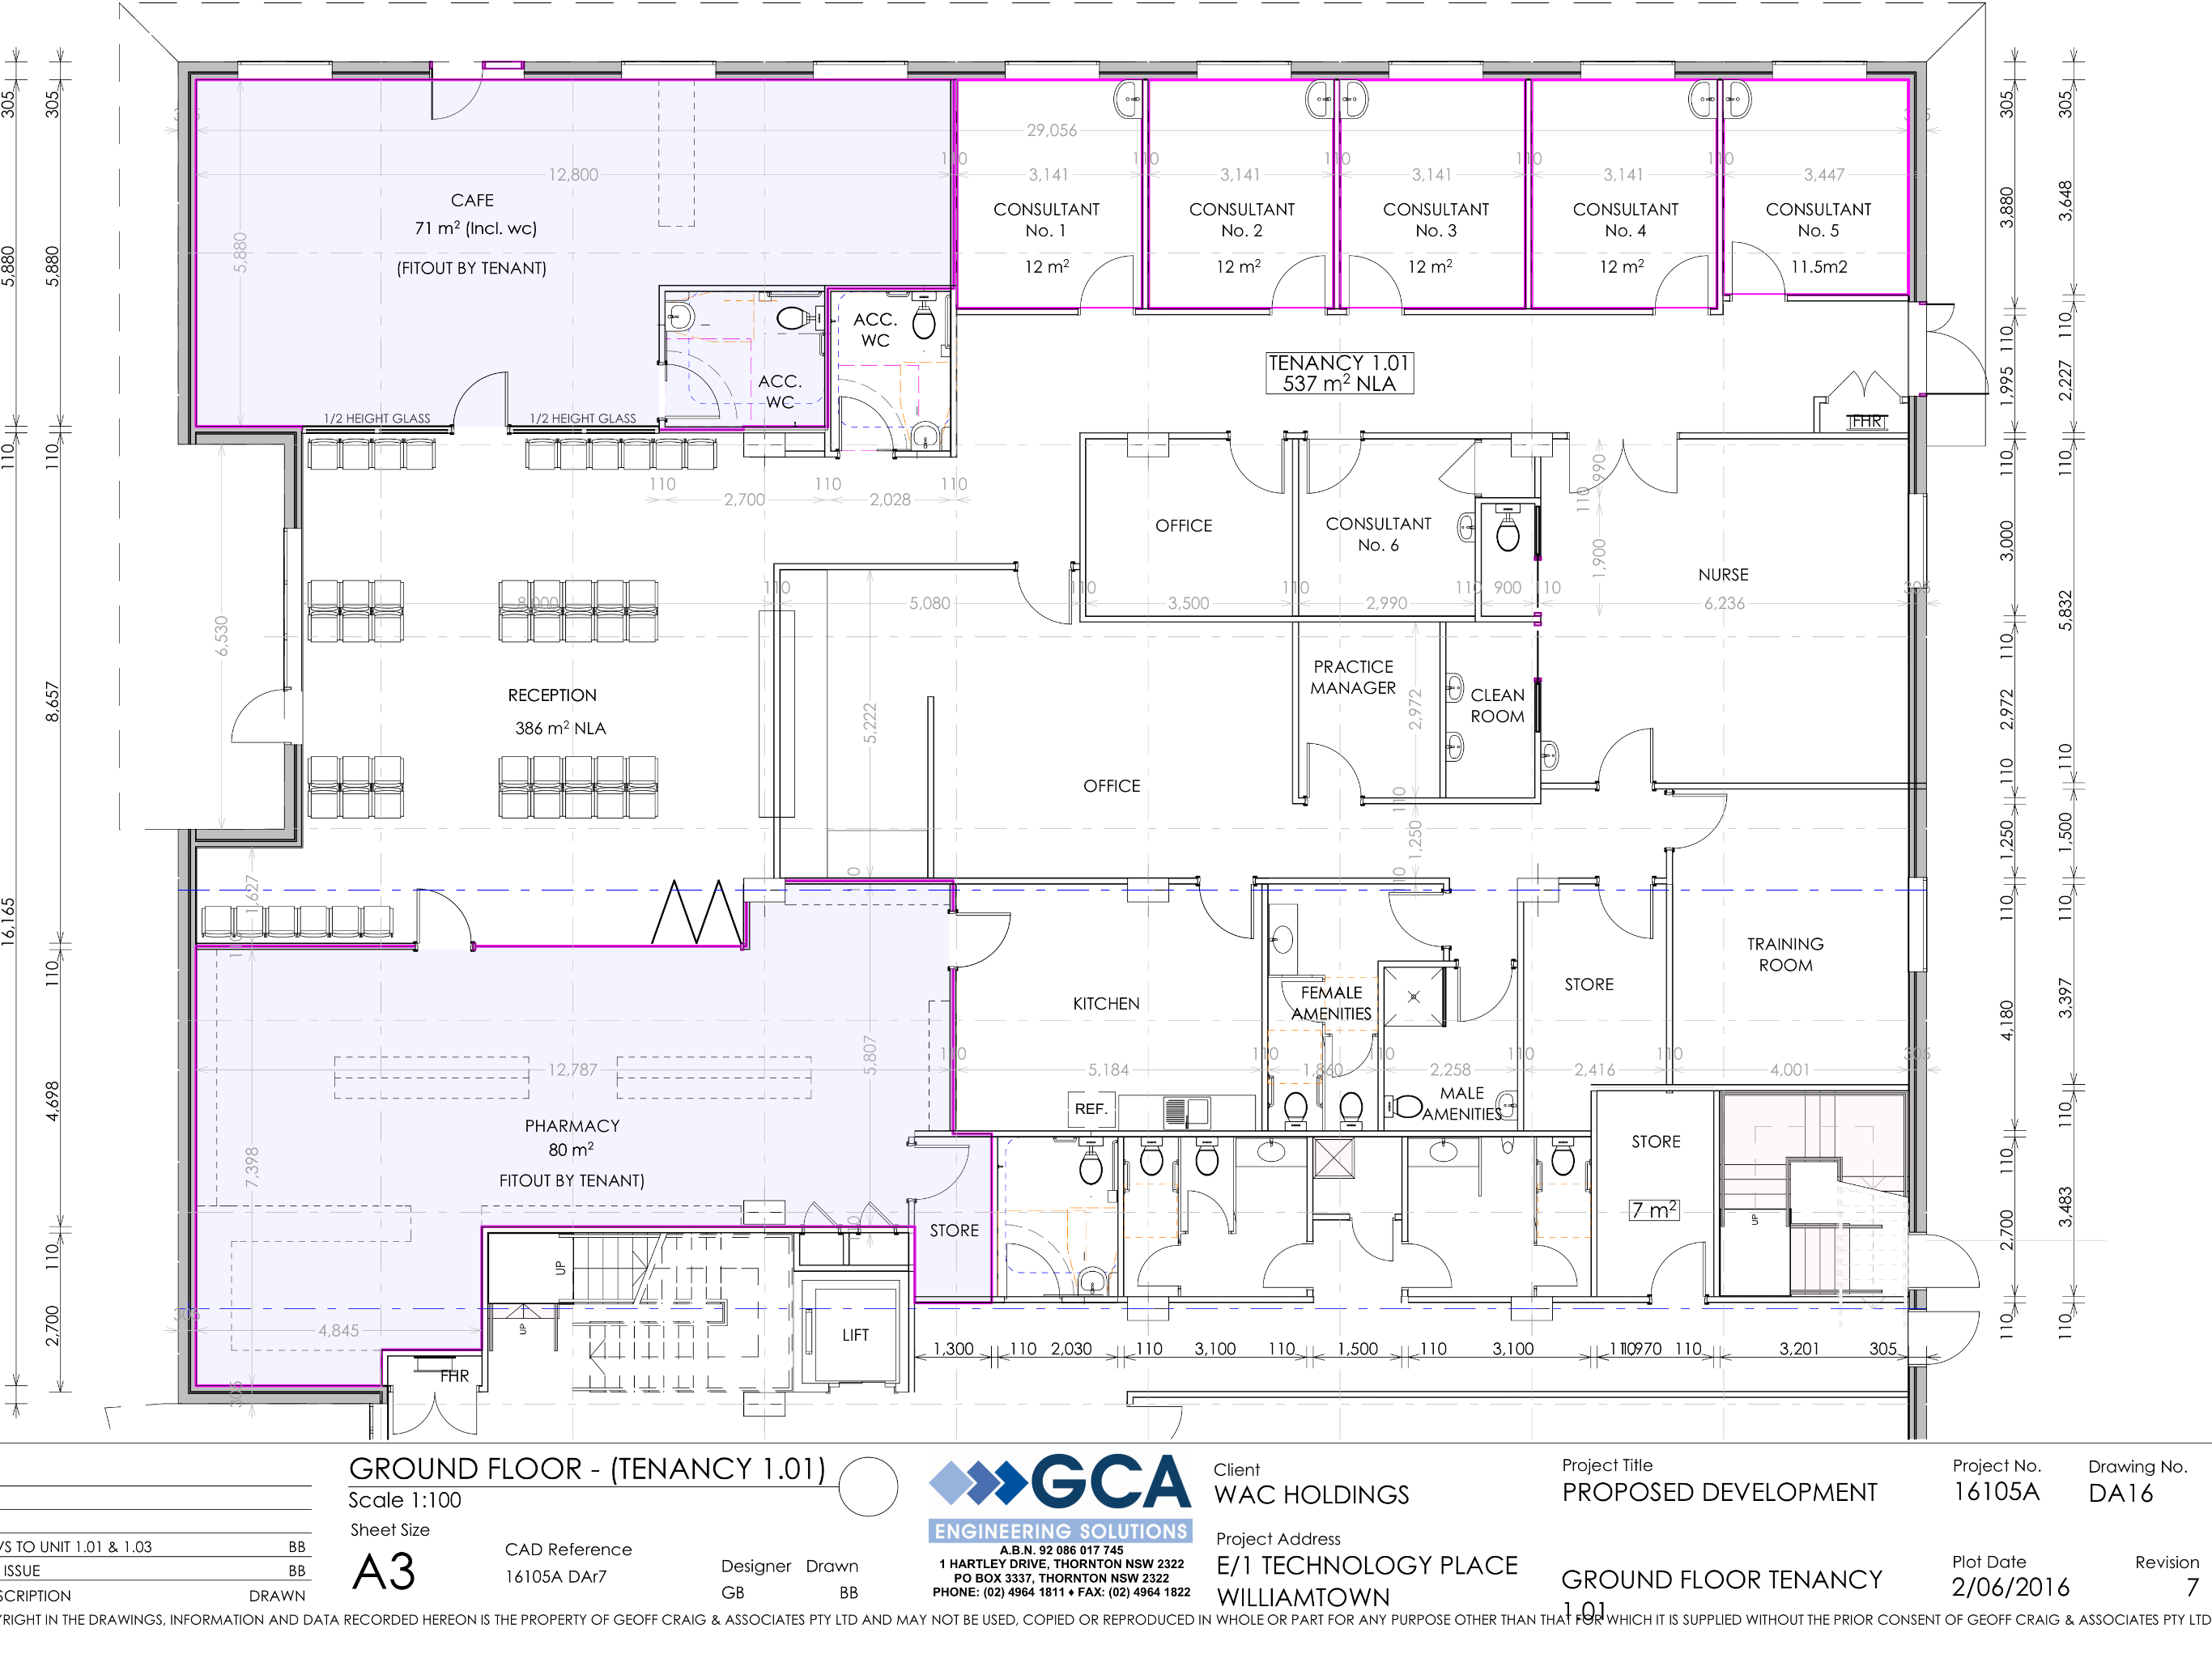 Plans for one of two floors of the new centre.